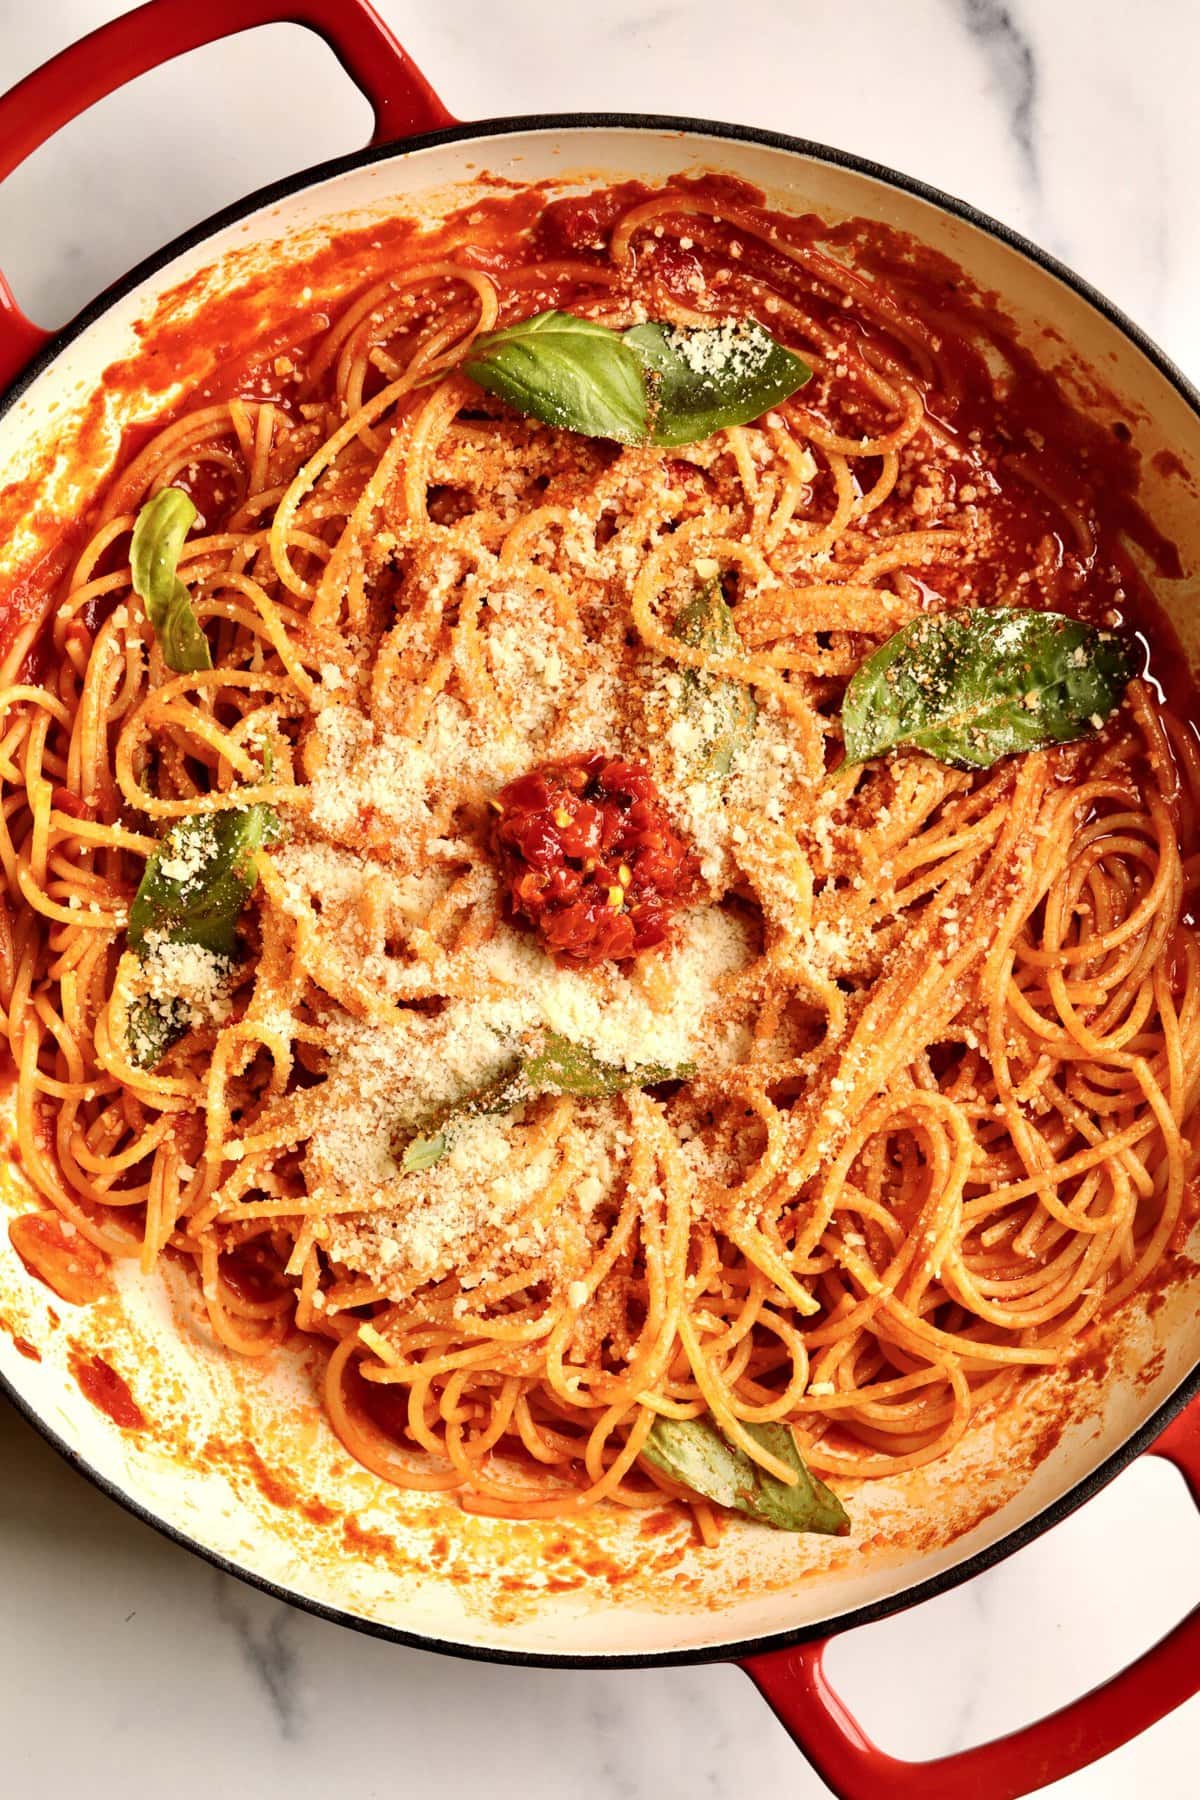 How to make: Quick Tomato Paste Pasta Sauce Recipe with Spaghetti- add the al dente pasta to the pan with the pasta sauce and stir to combine. Add fresh basil and toss. Add extra cheese and Calabrian chili paste if desired.